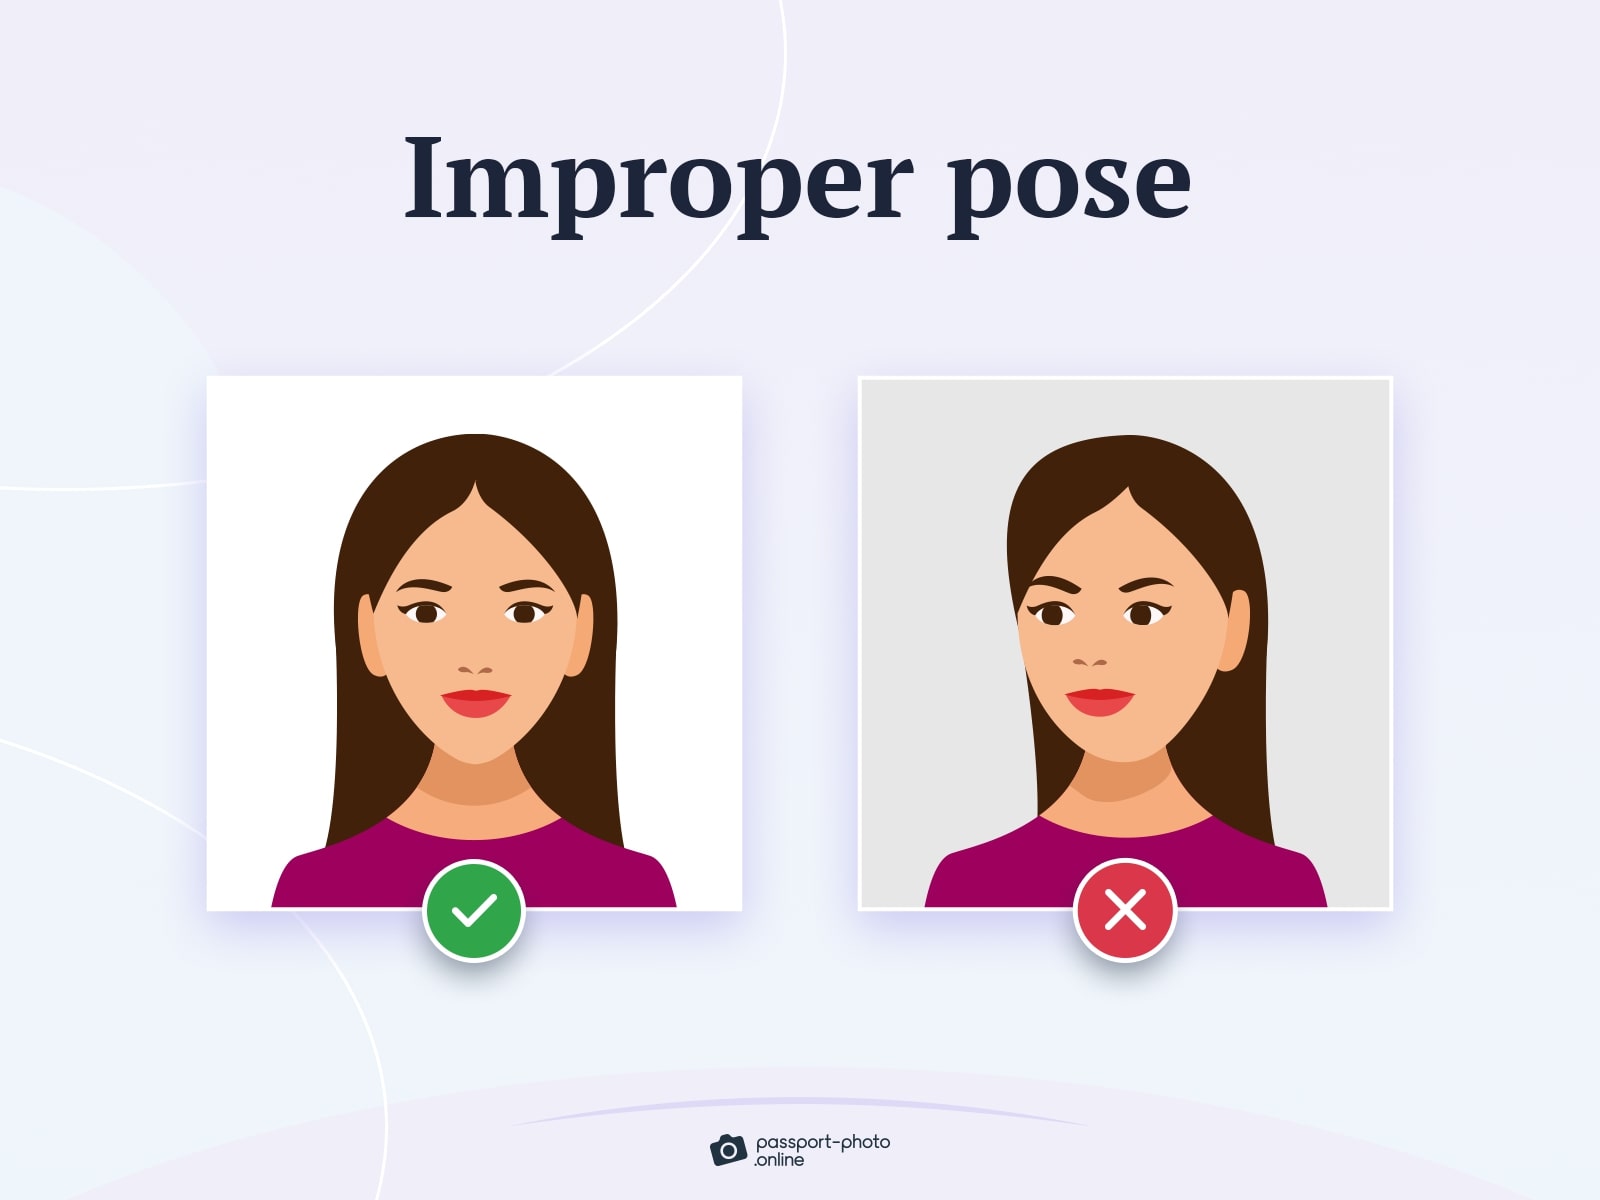 A representation of accepted and improper pose for passport photos.